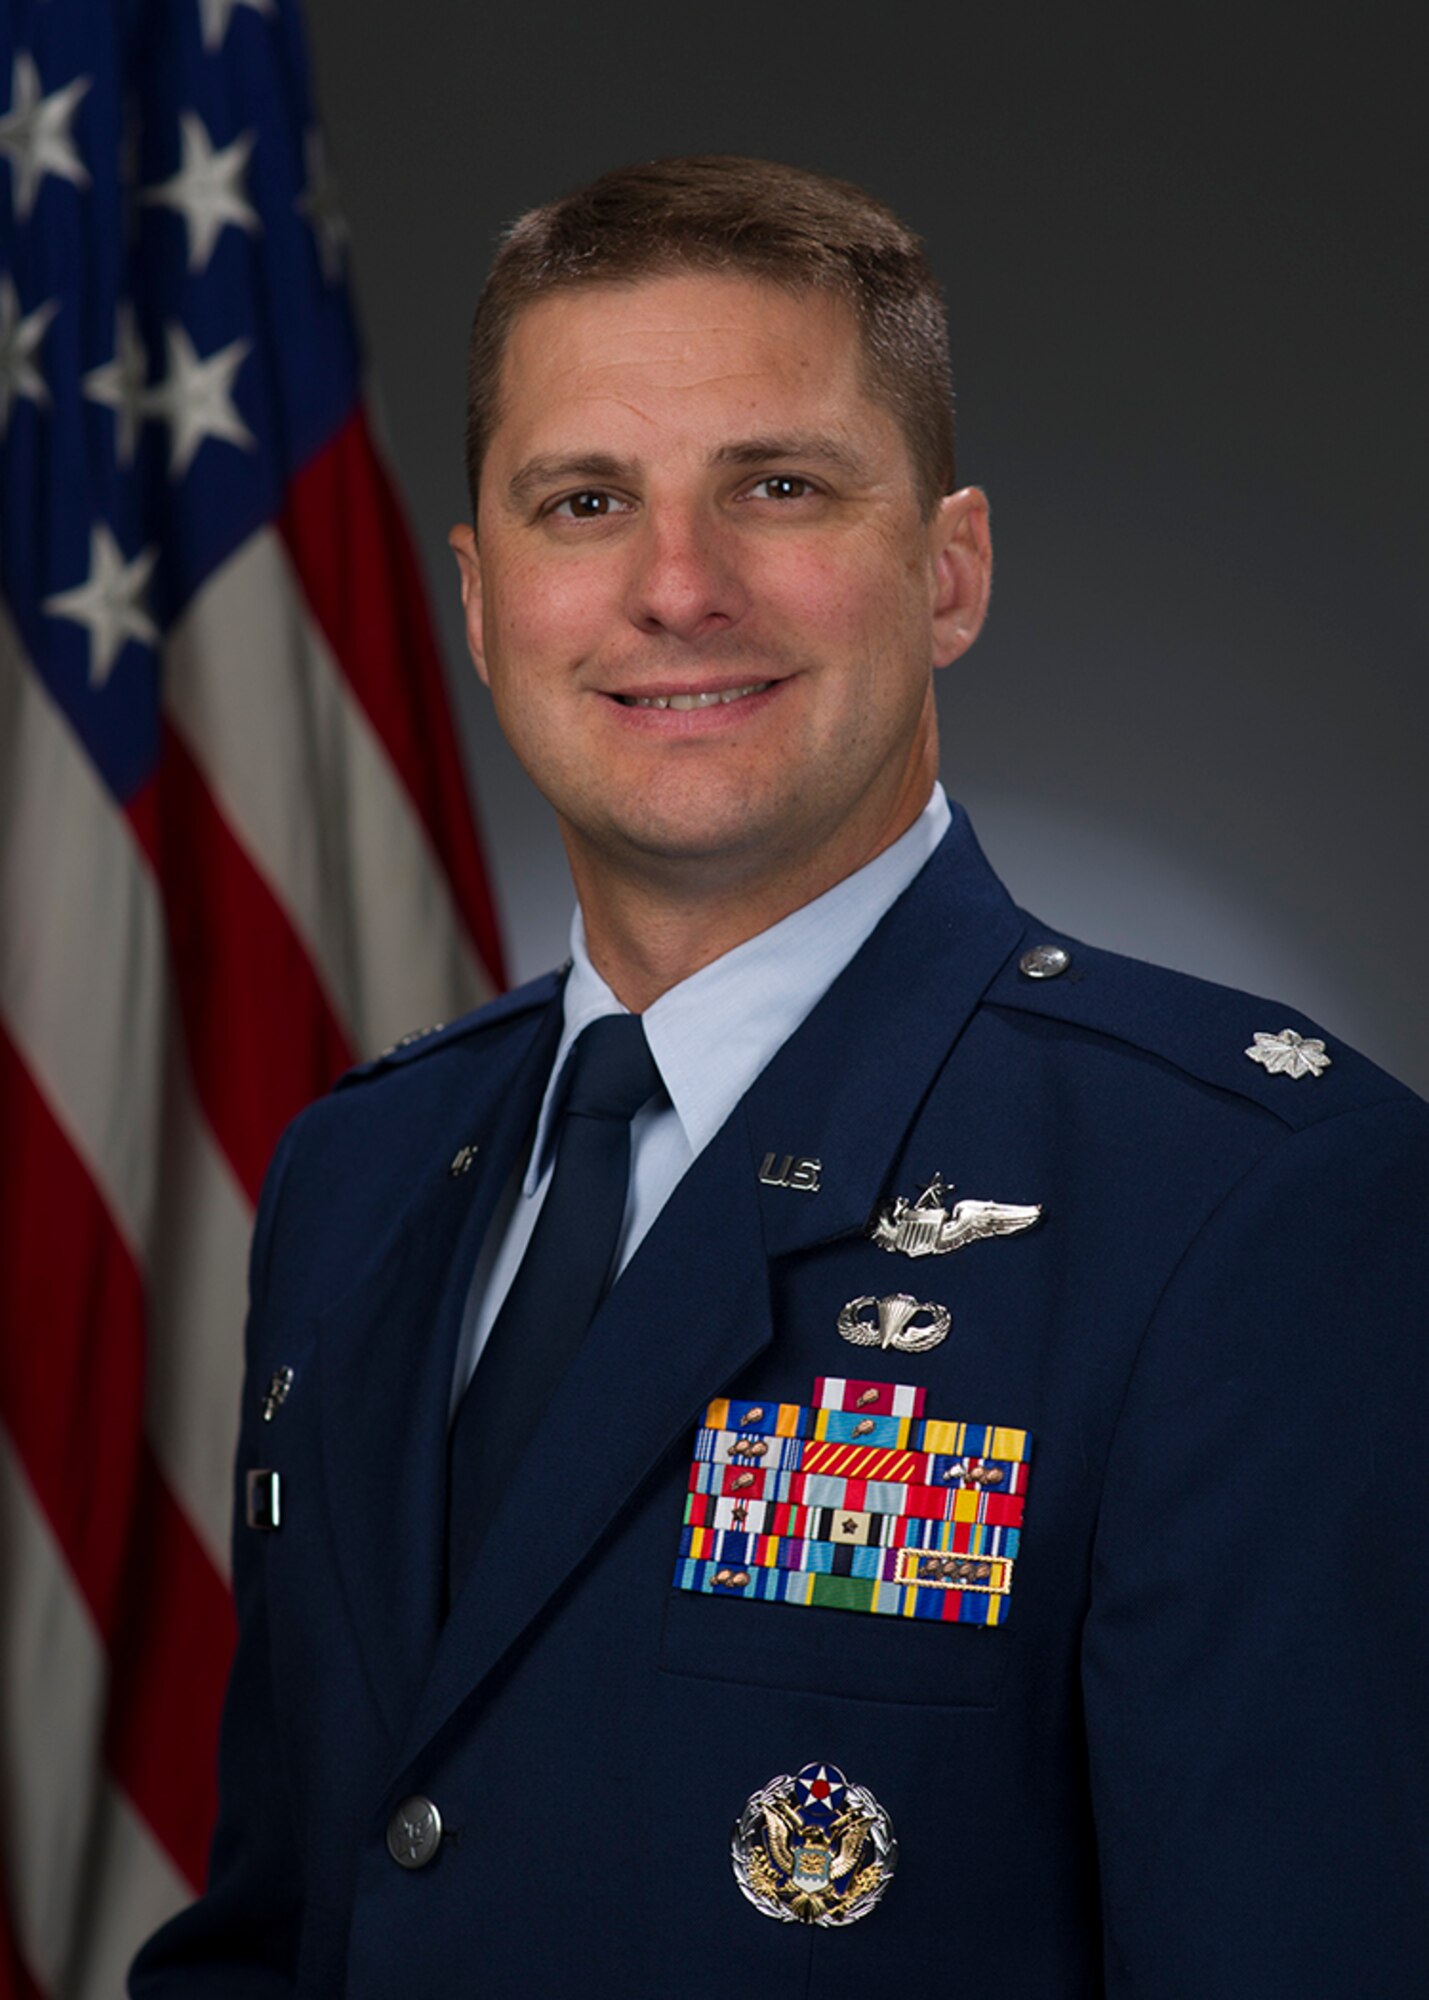 Lt. Col. Jeff Krulick, 321st Air Mobility Operations Squadron, shares some insight on the importance of asking the right questions. (U.S. Air Force photo)

